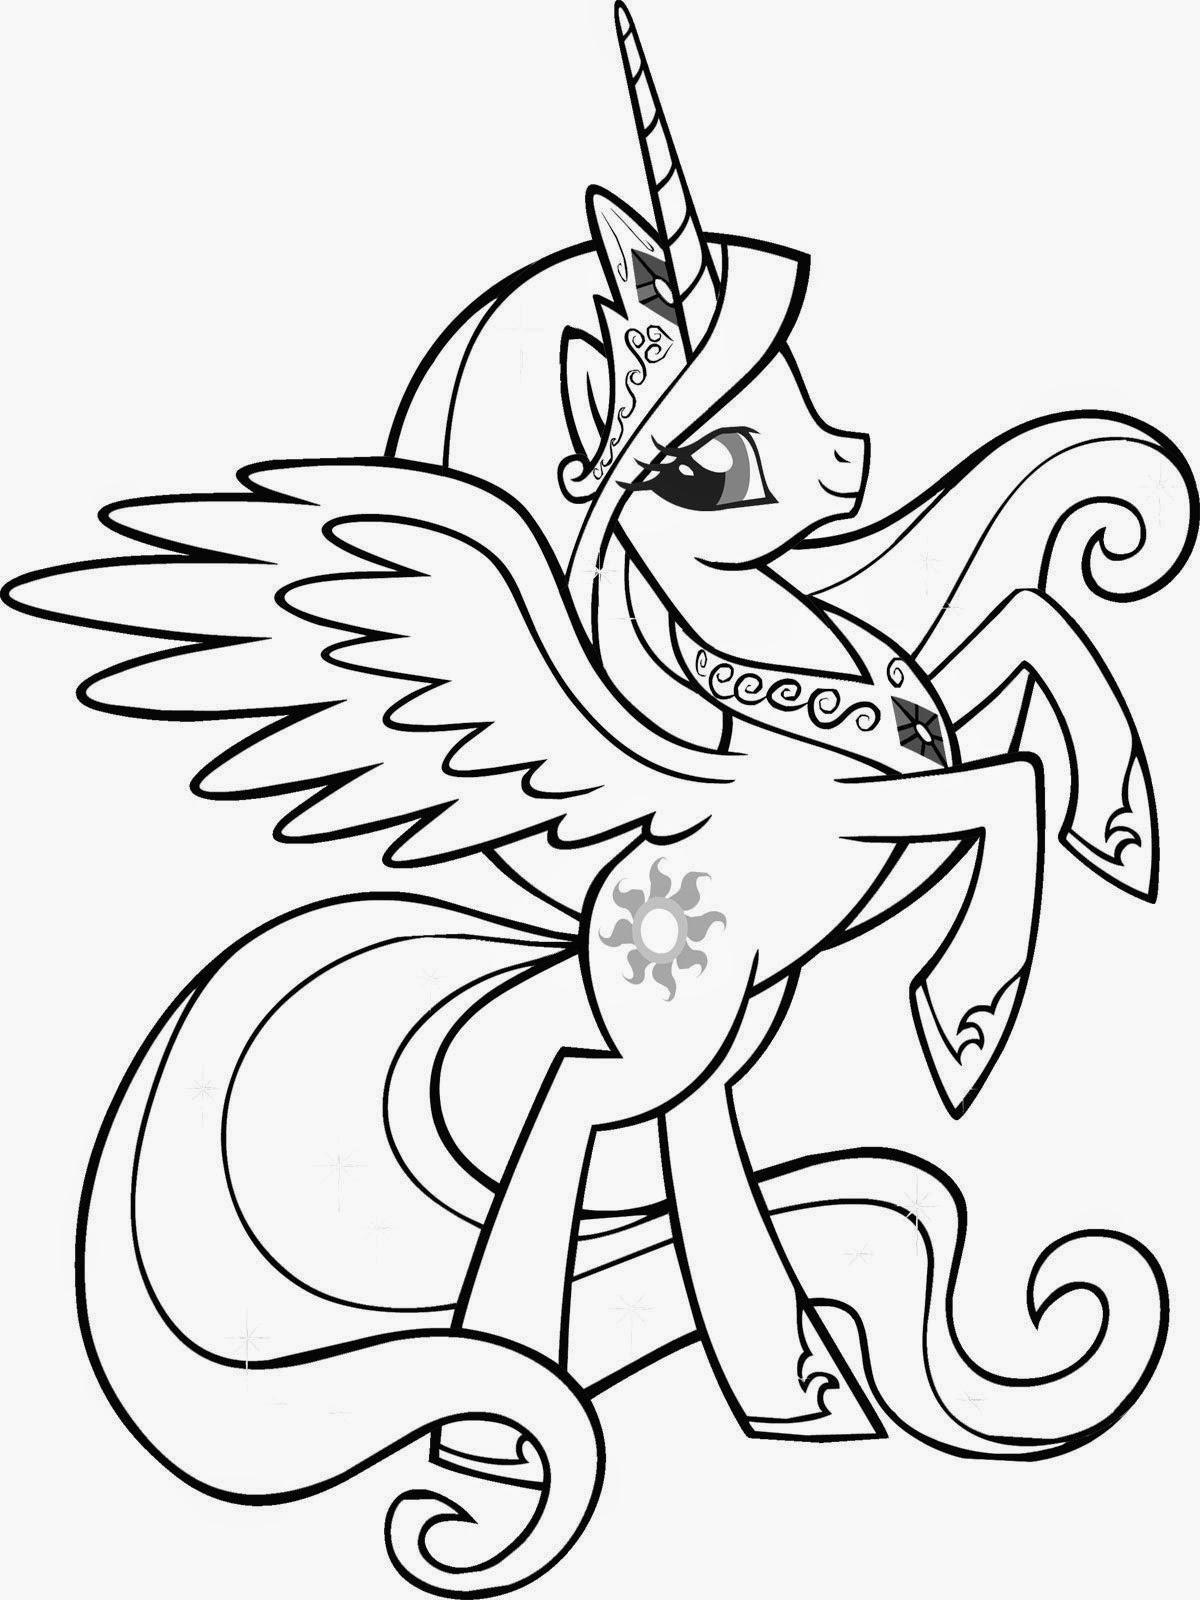 Unicorn Coloring Pages For Kids 9